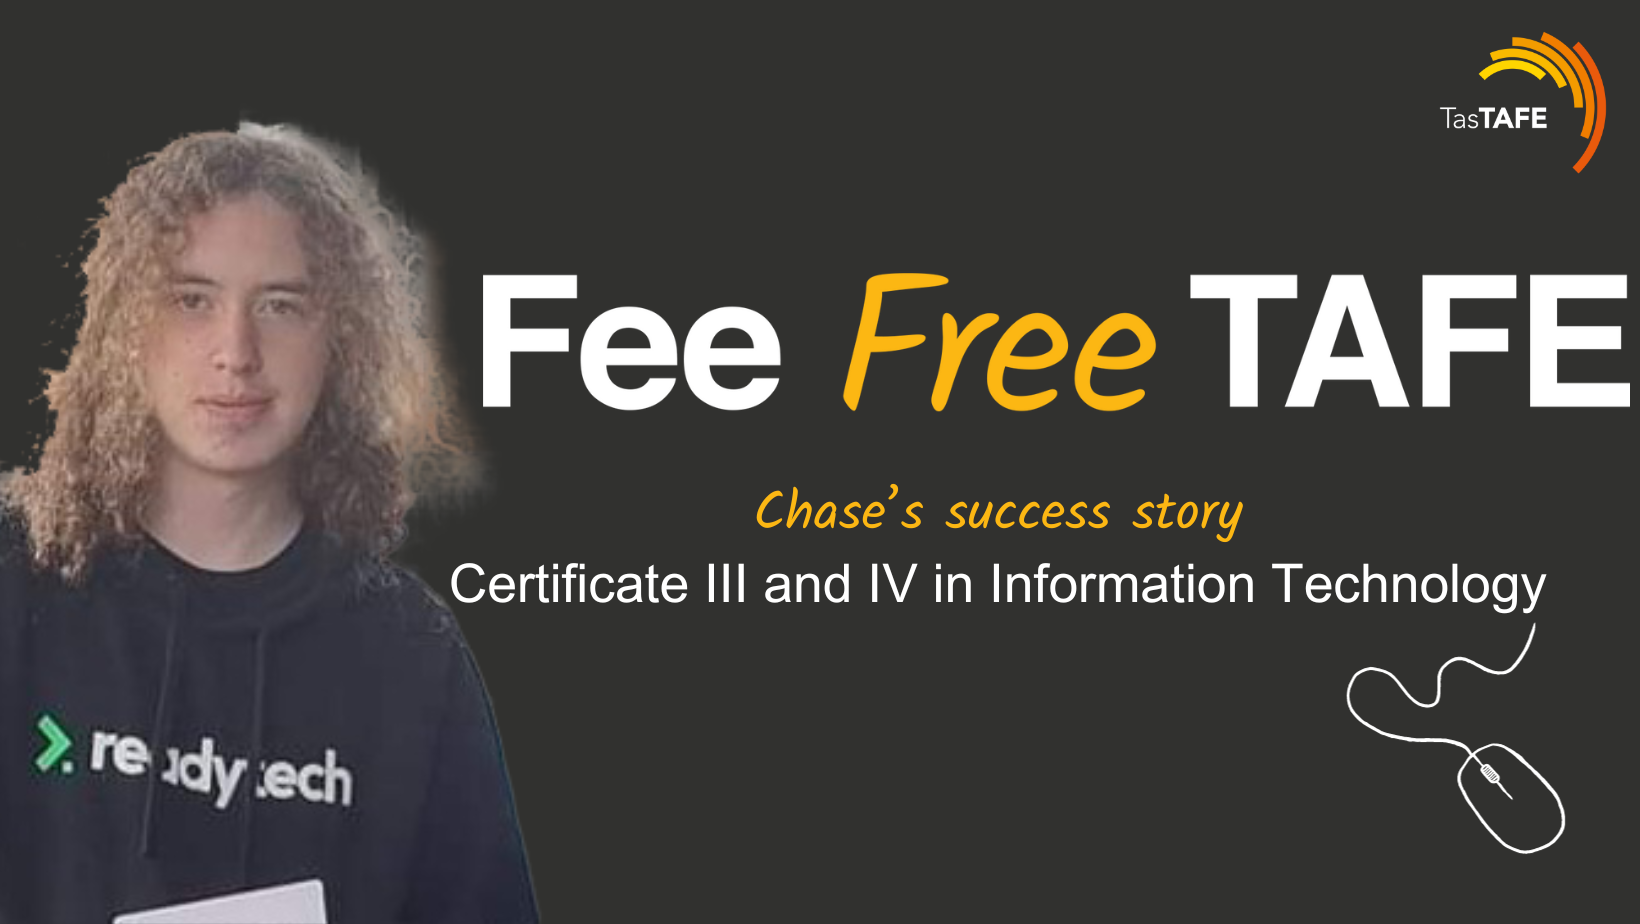 Image of a person and text: Fee free Tafe - Chase's success story. Certificate III and IV in Information Technology